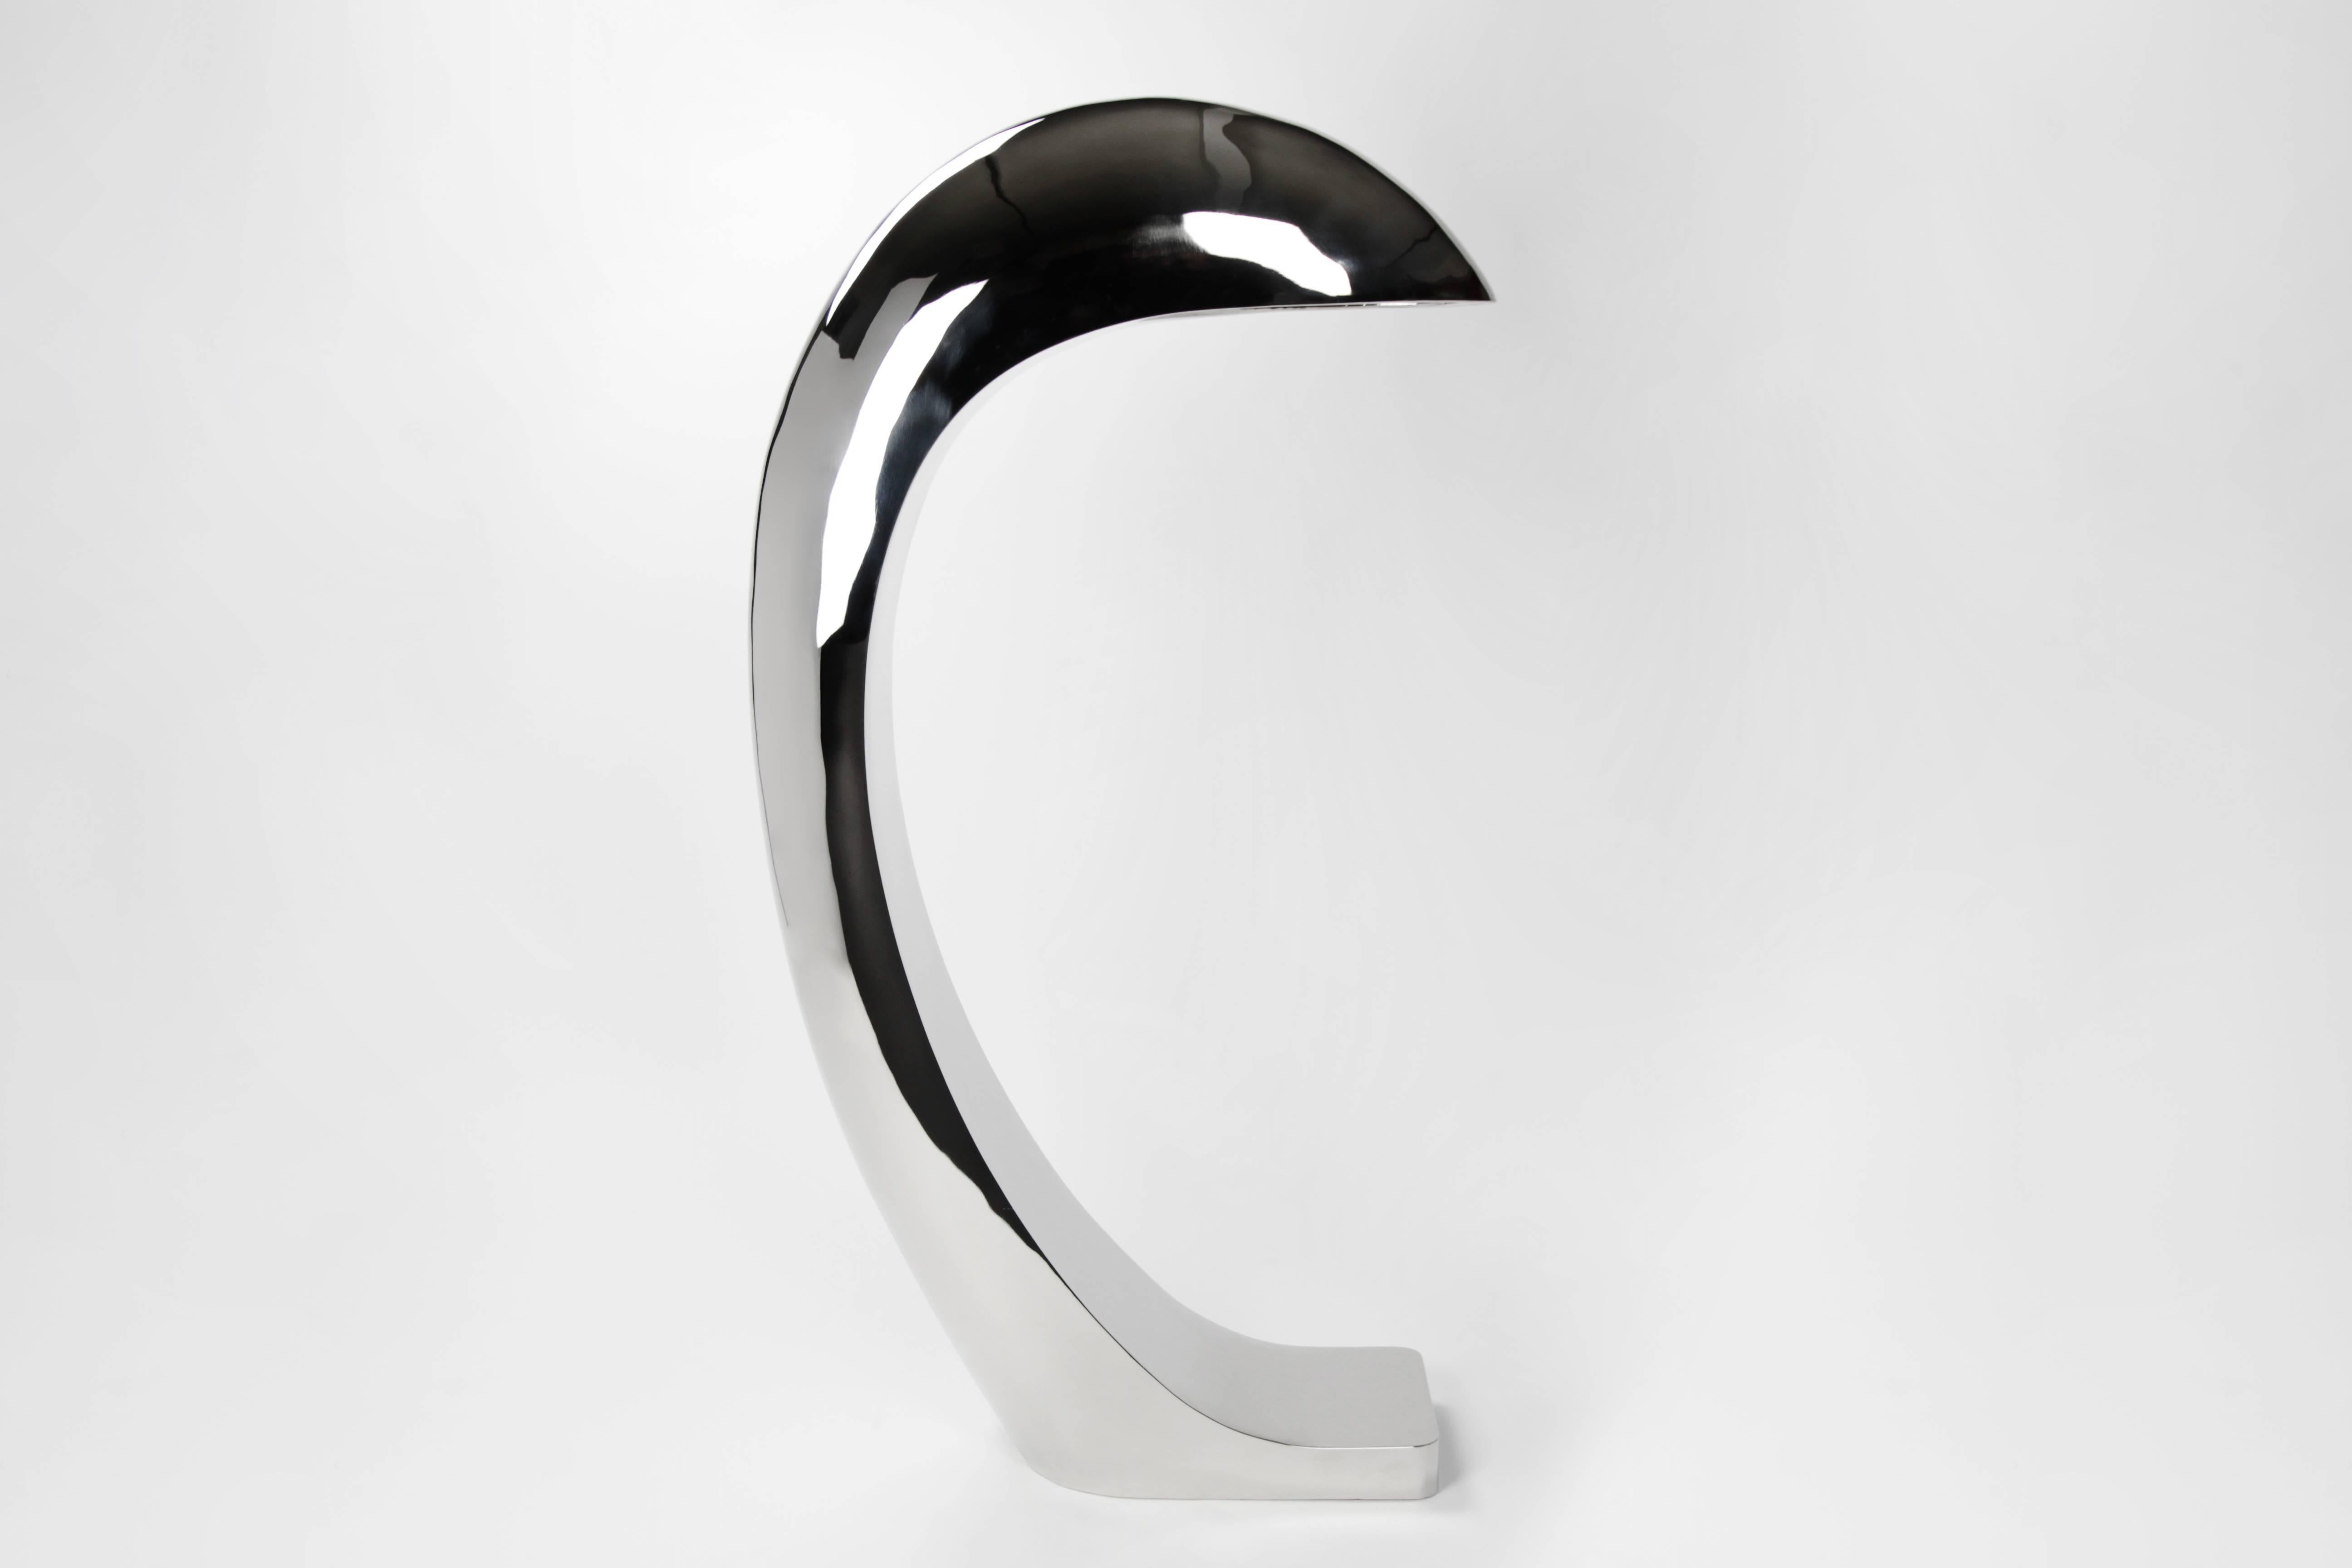 The Nautilus Floor Lamp is the second addition to the Nautilus Study Series. 
The sculptural lamp stands 44